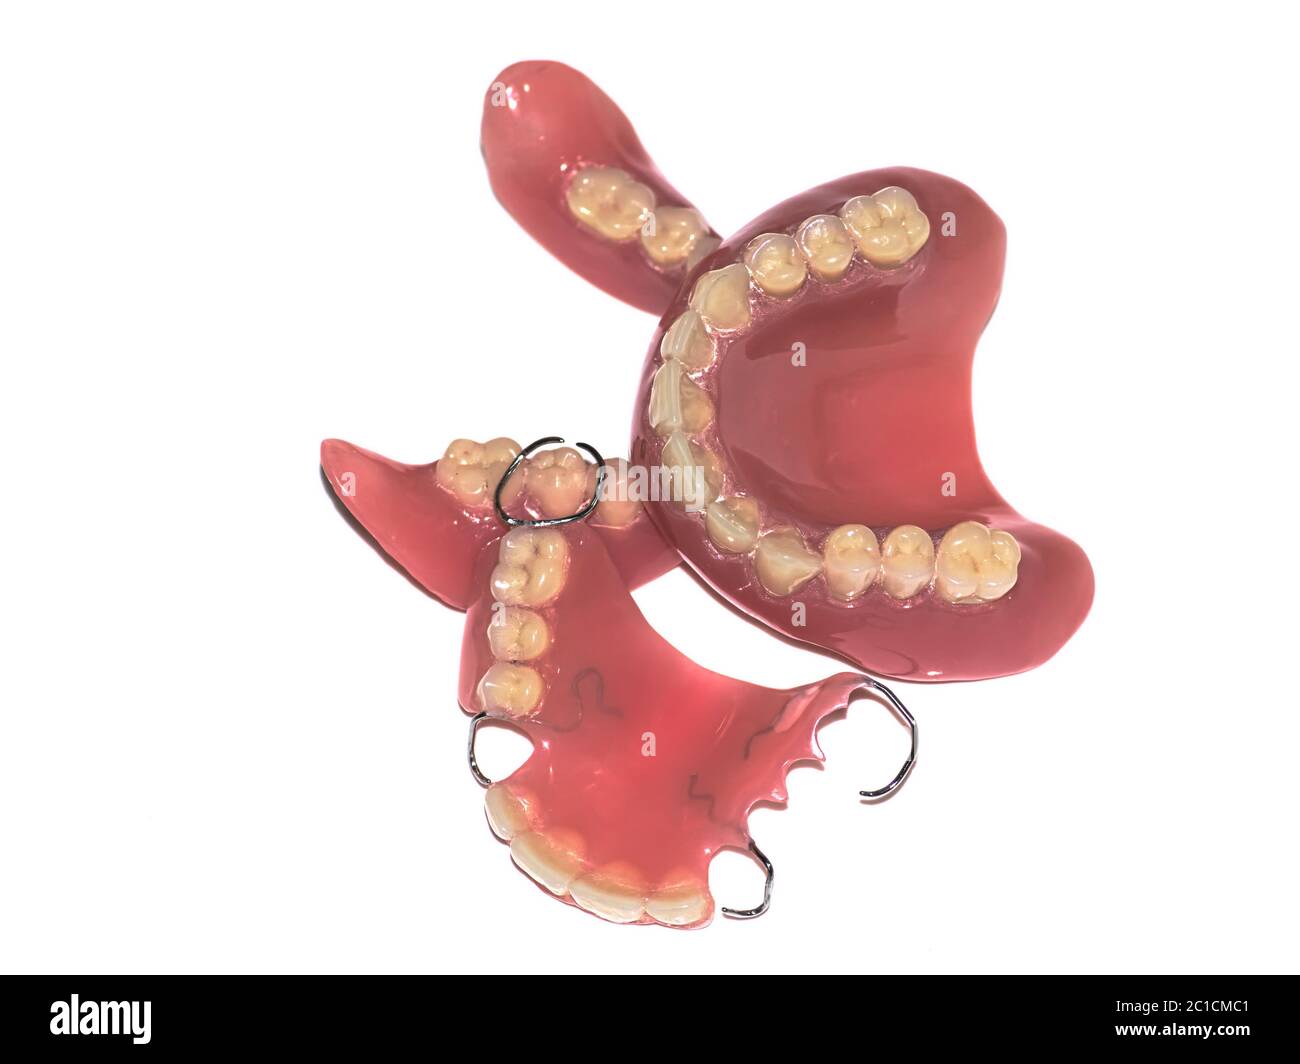 Dentures in various forms Stock Photo